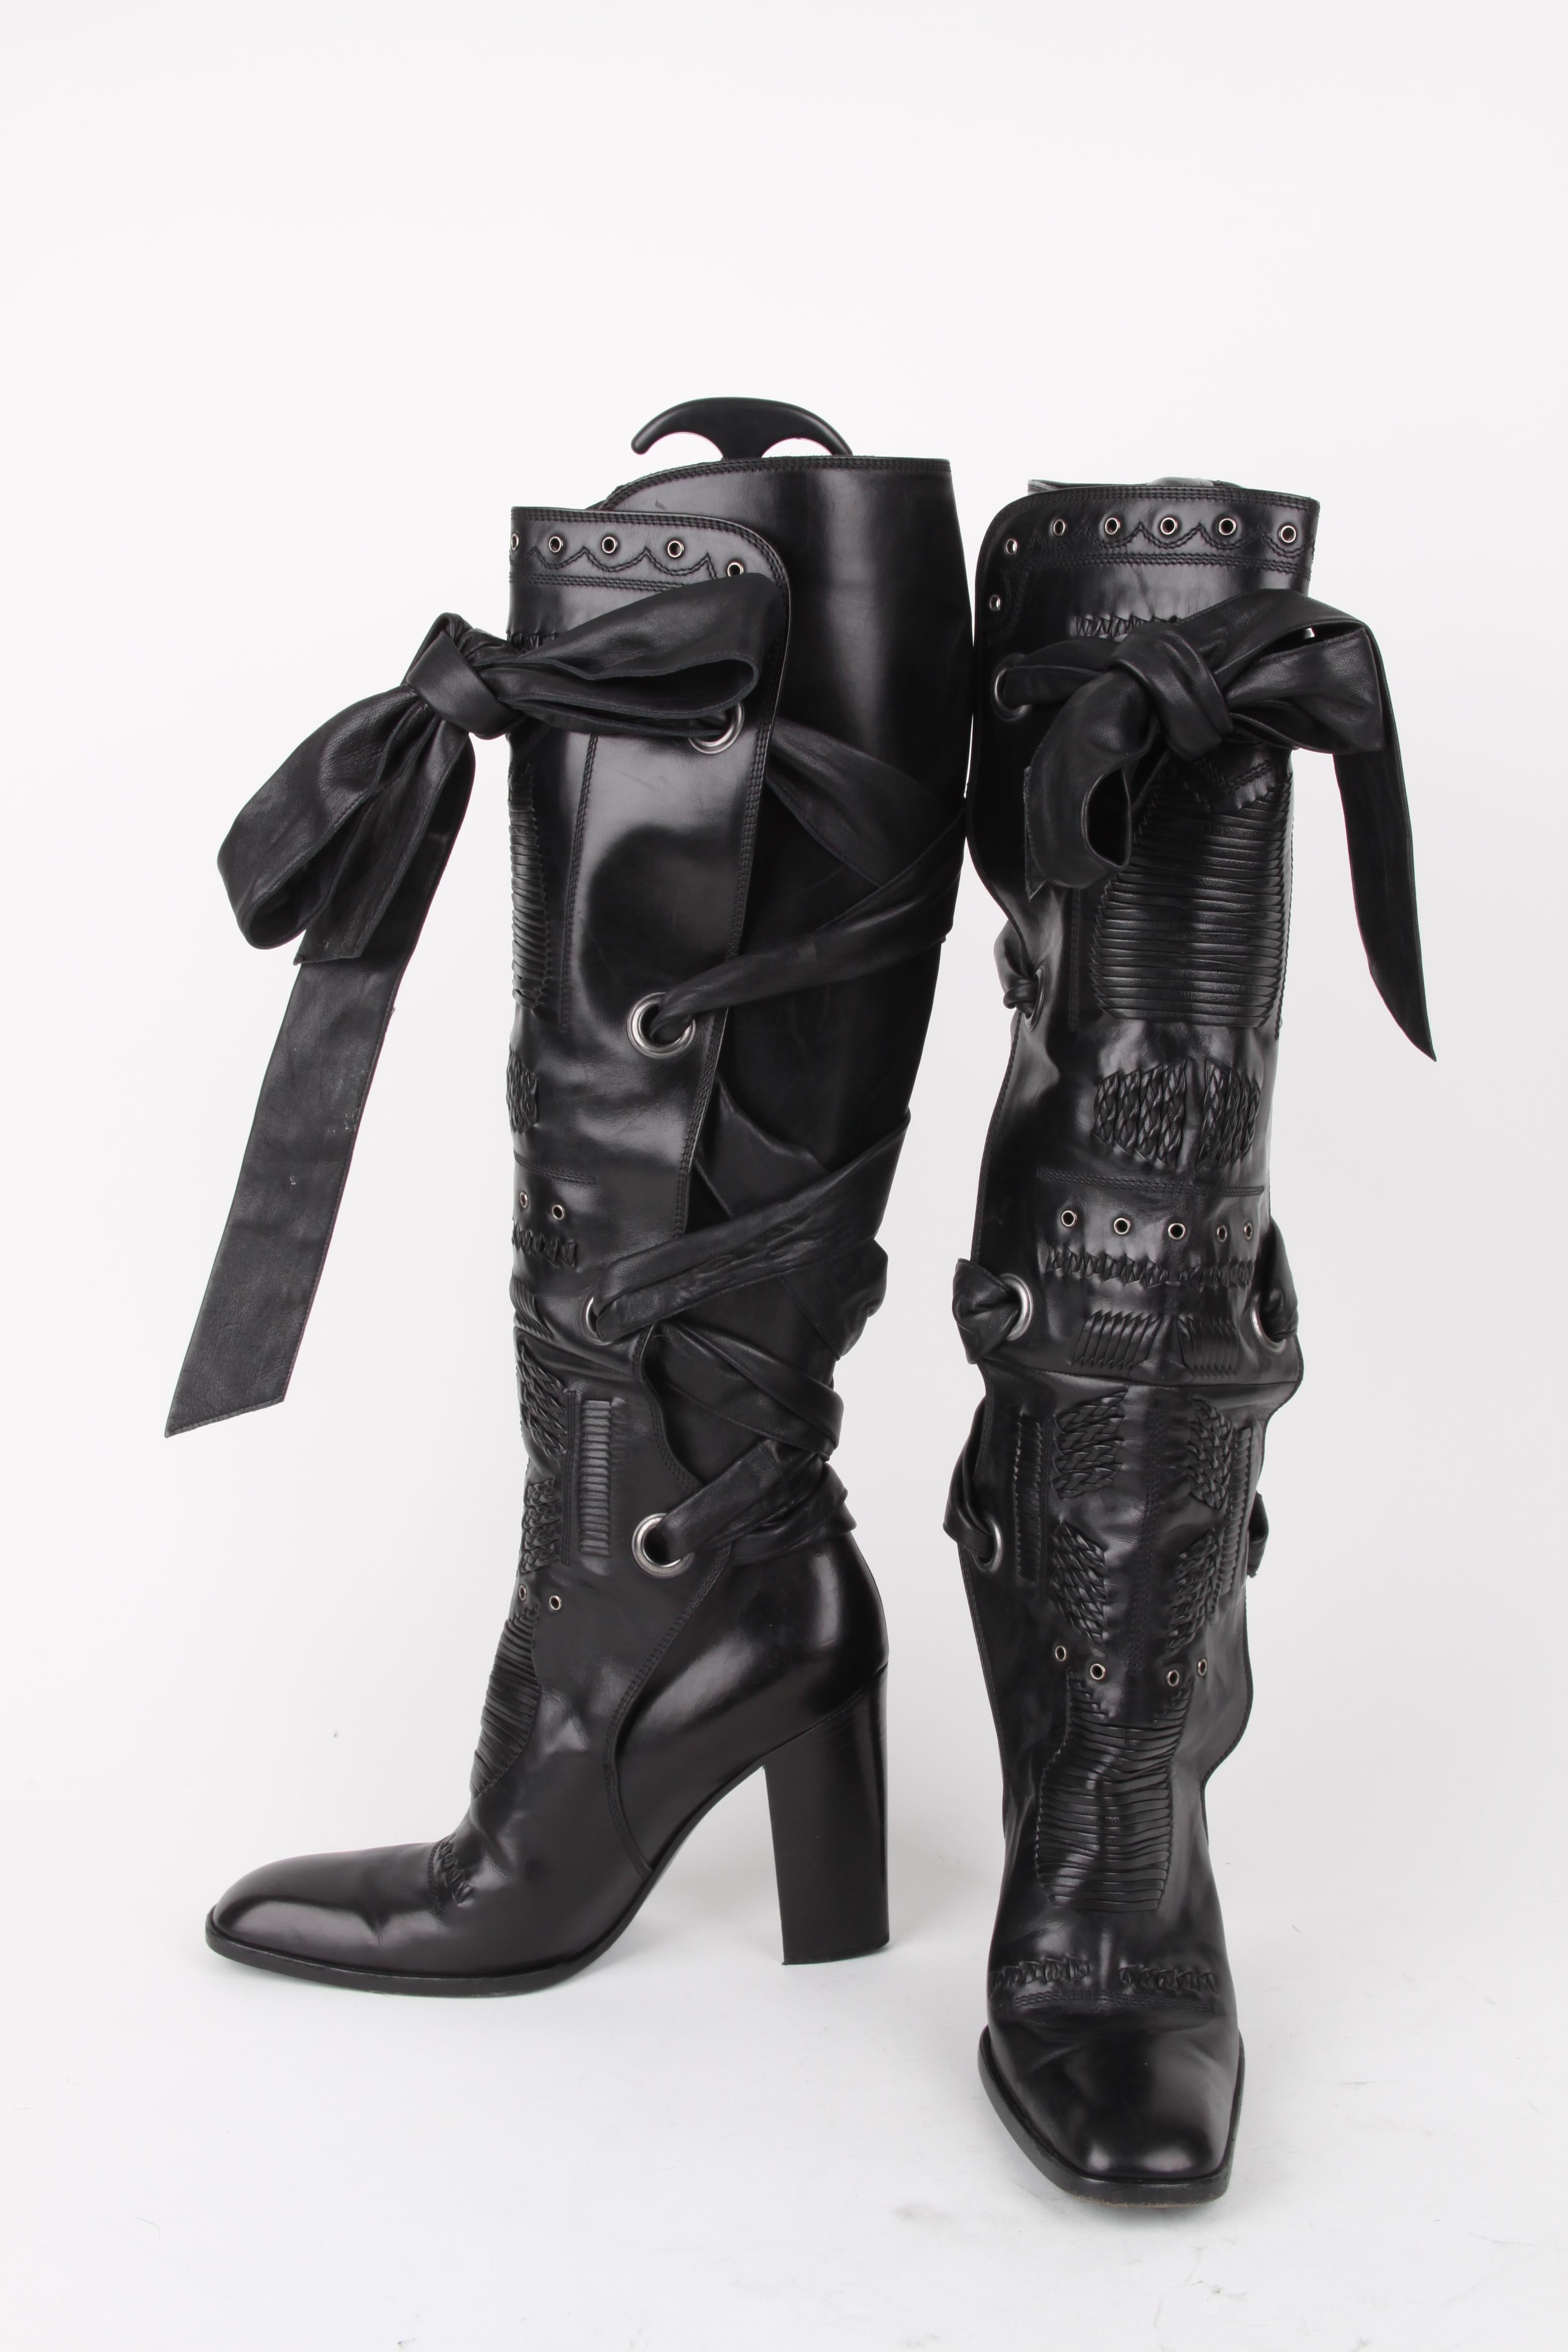 Yves Saint Laurent Rive Gauche by Tom Ford Black Laced Up Knee High Boots In Excellent Condition For Sale In Baarn, NL